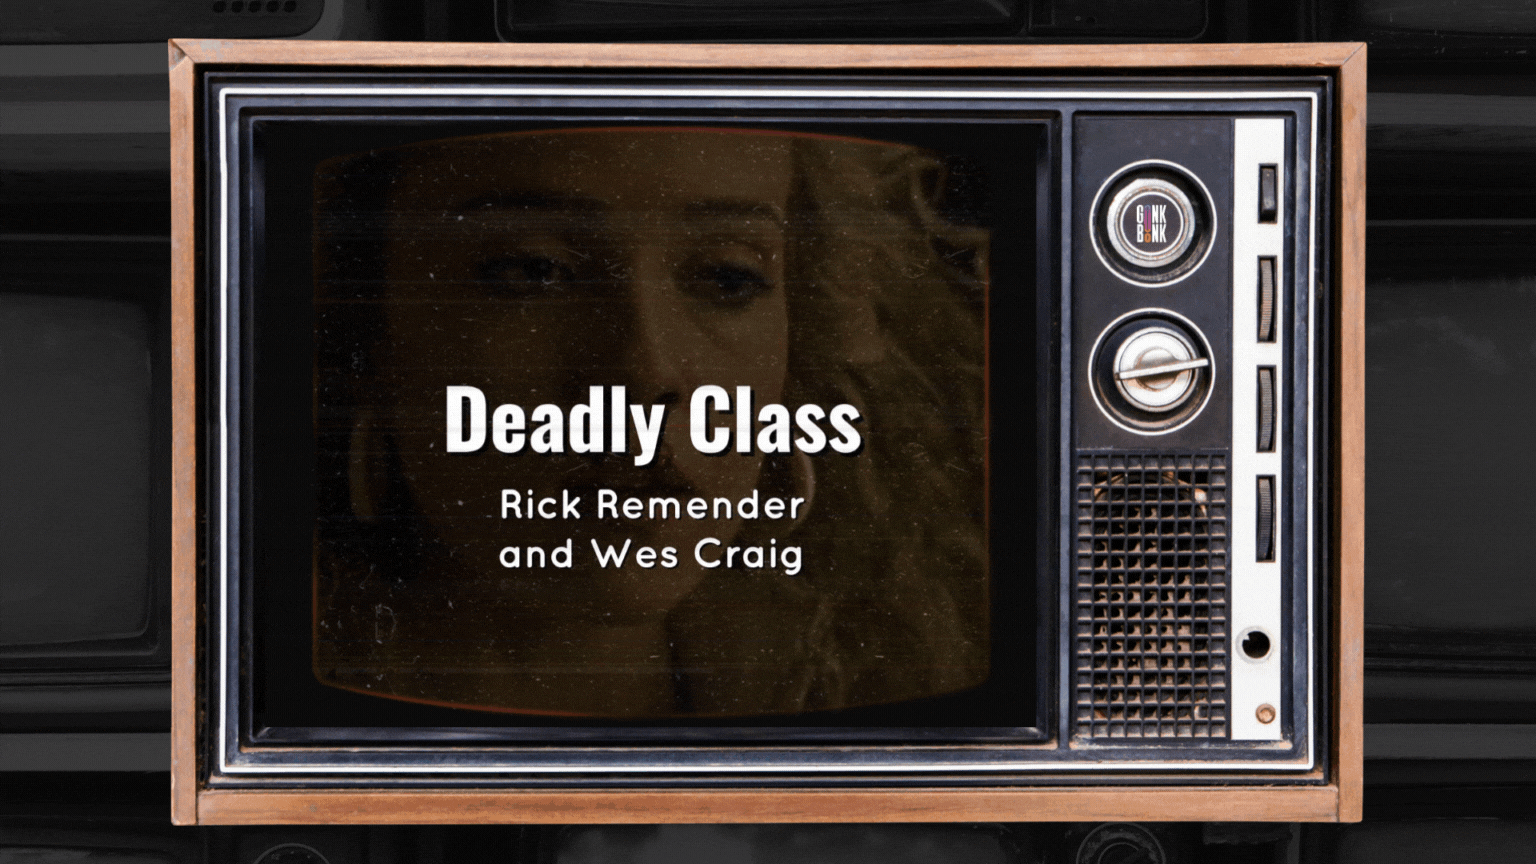 Deadly Class TV Show and Comics